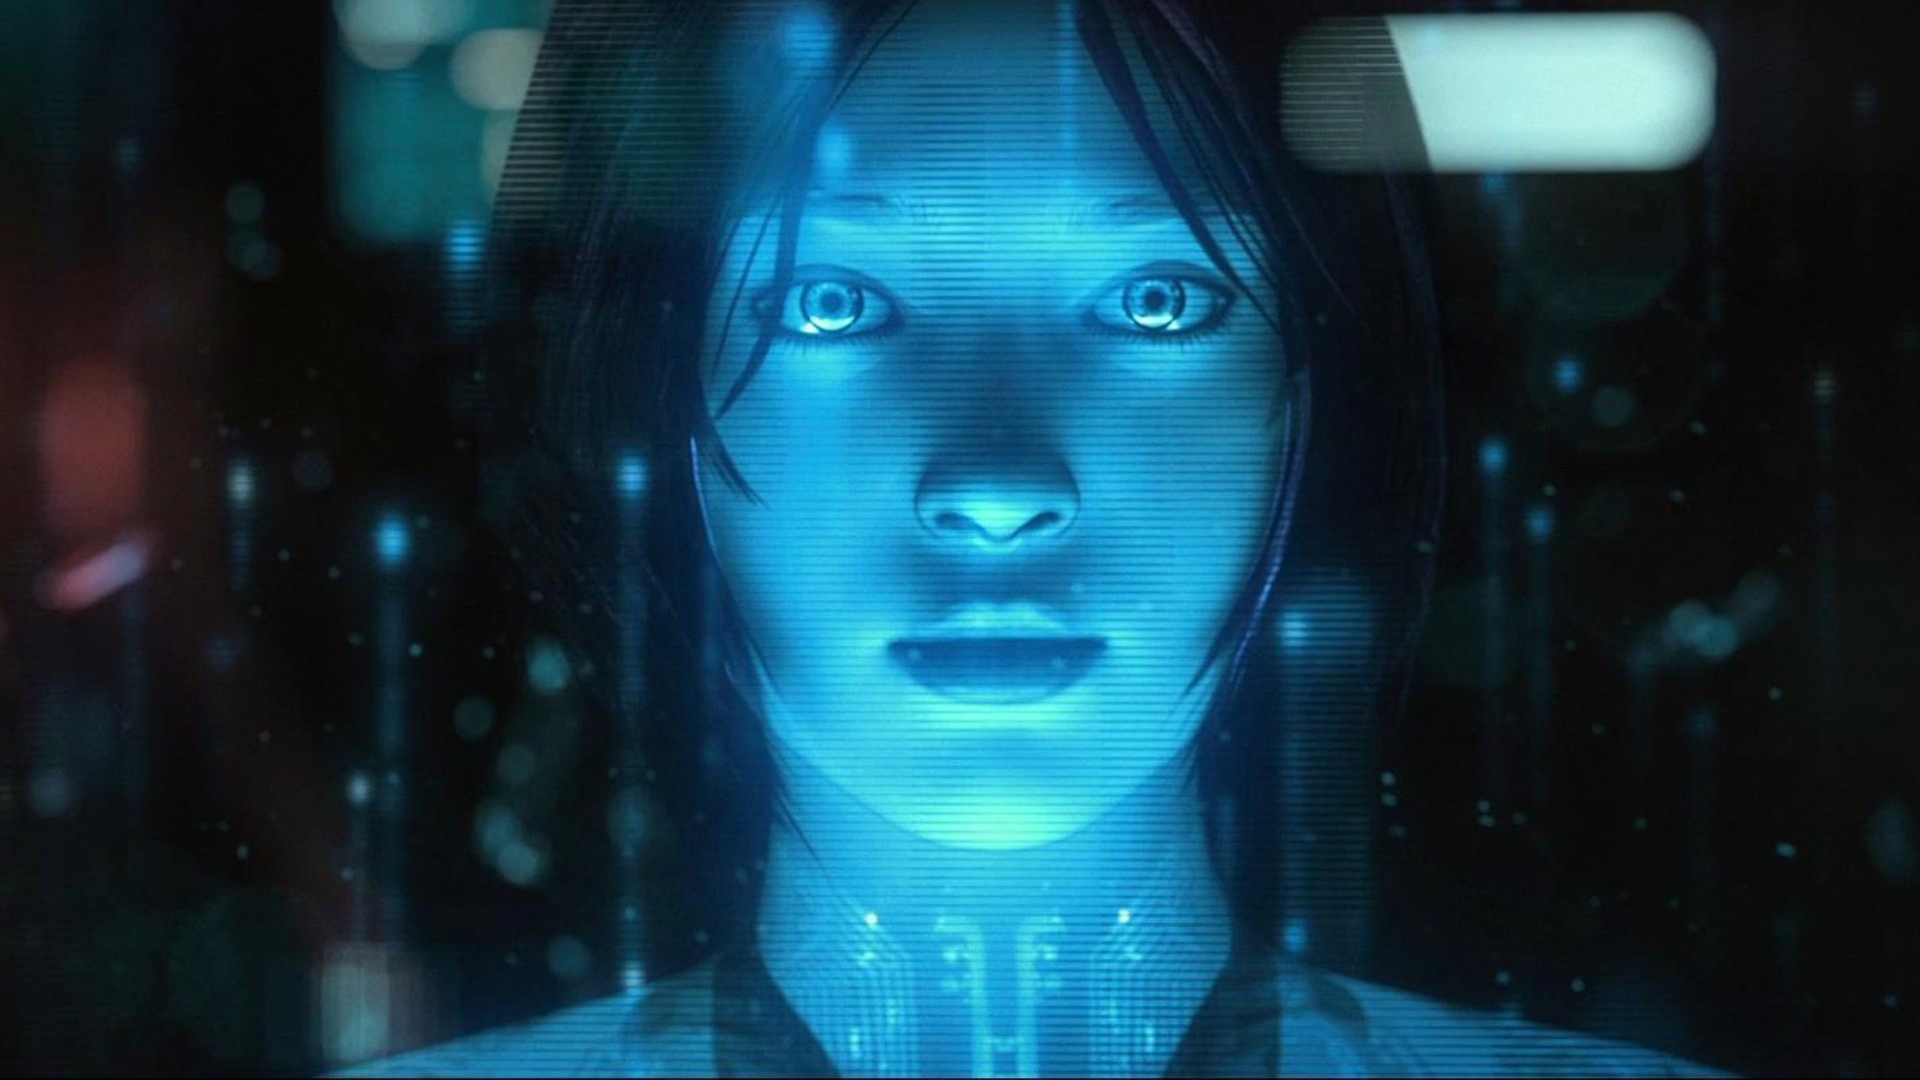 Microsoft S Cortana Personal Assistant App Has A Lot To Live Up